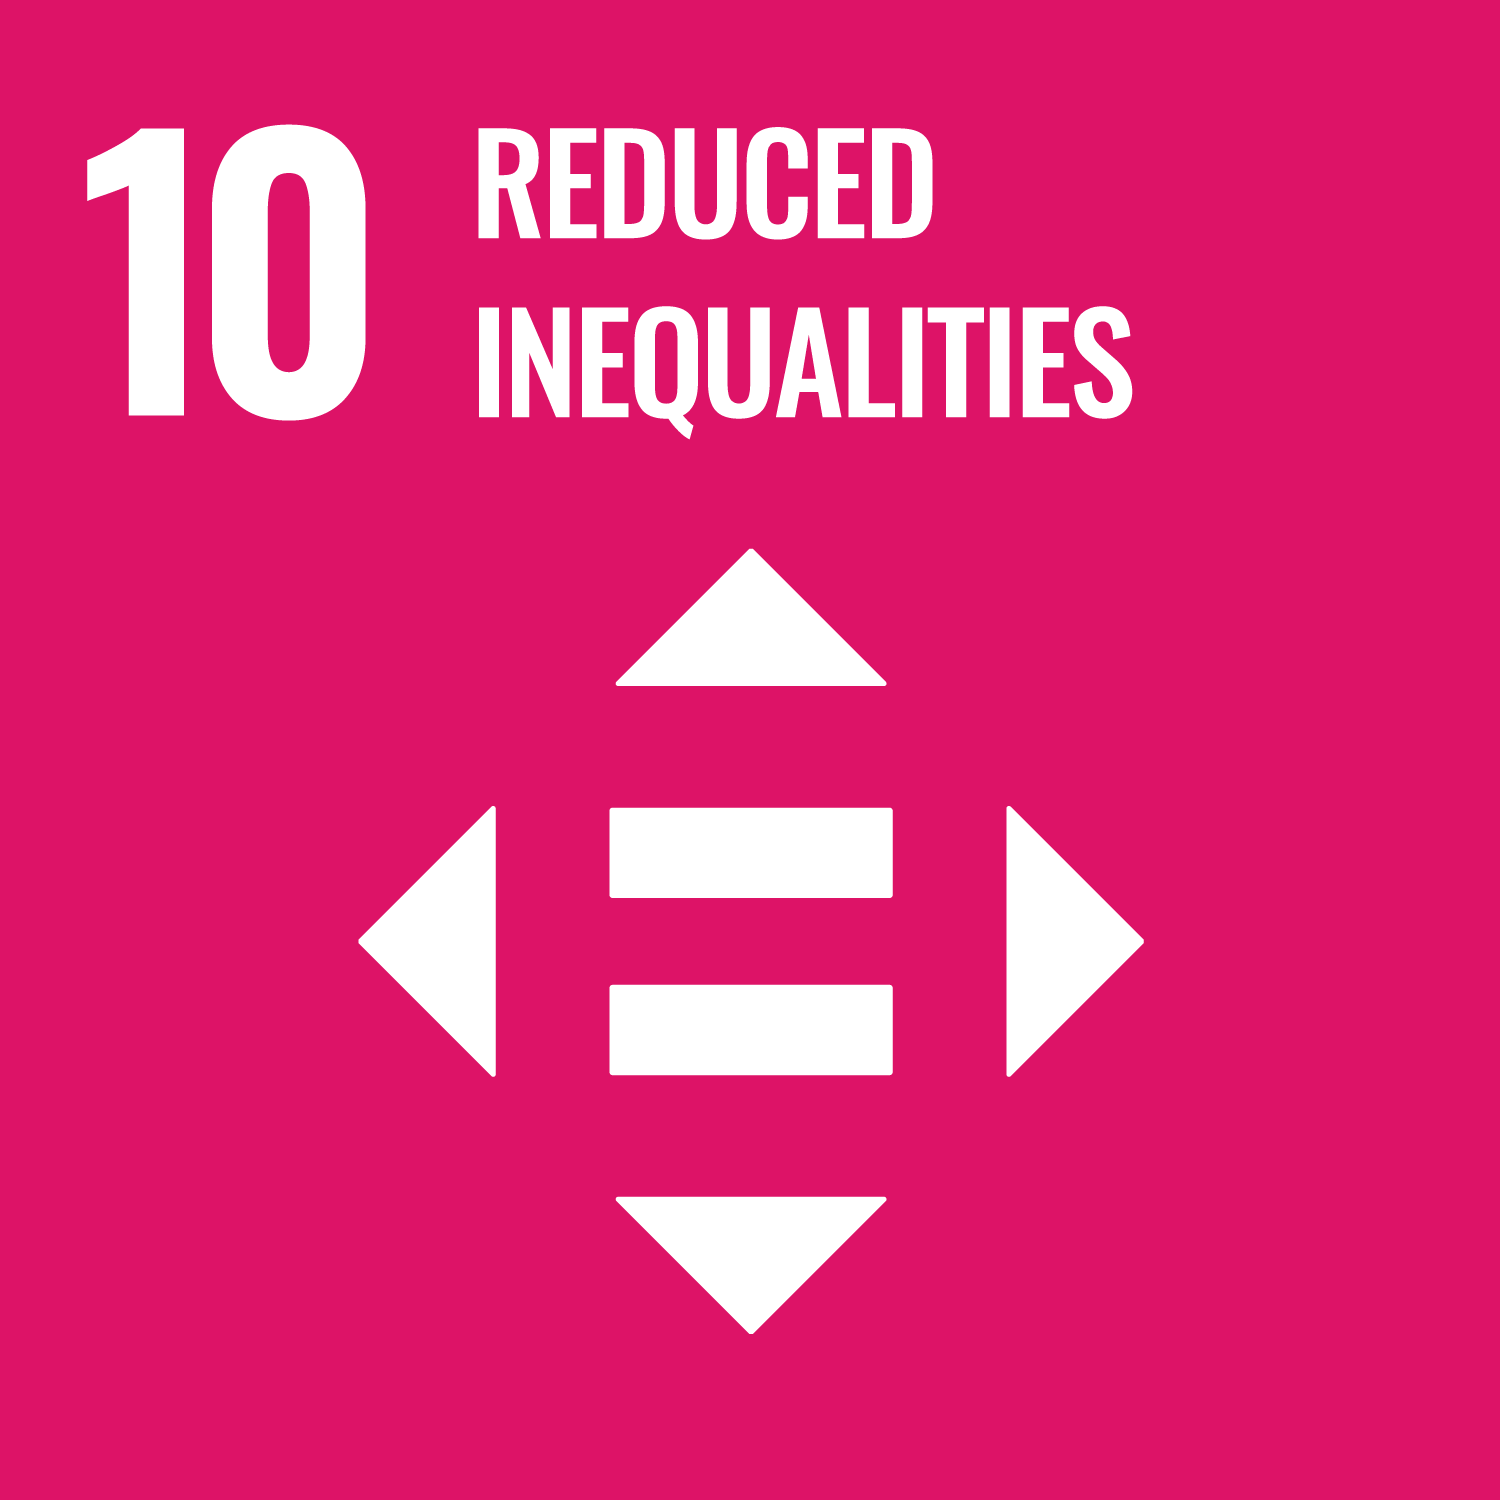 An icon for UN SDG #10 - Reduced Inequalities. It depicts an equals sign with four arrows pointing outwards in each direction against a pink background.